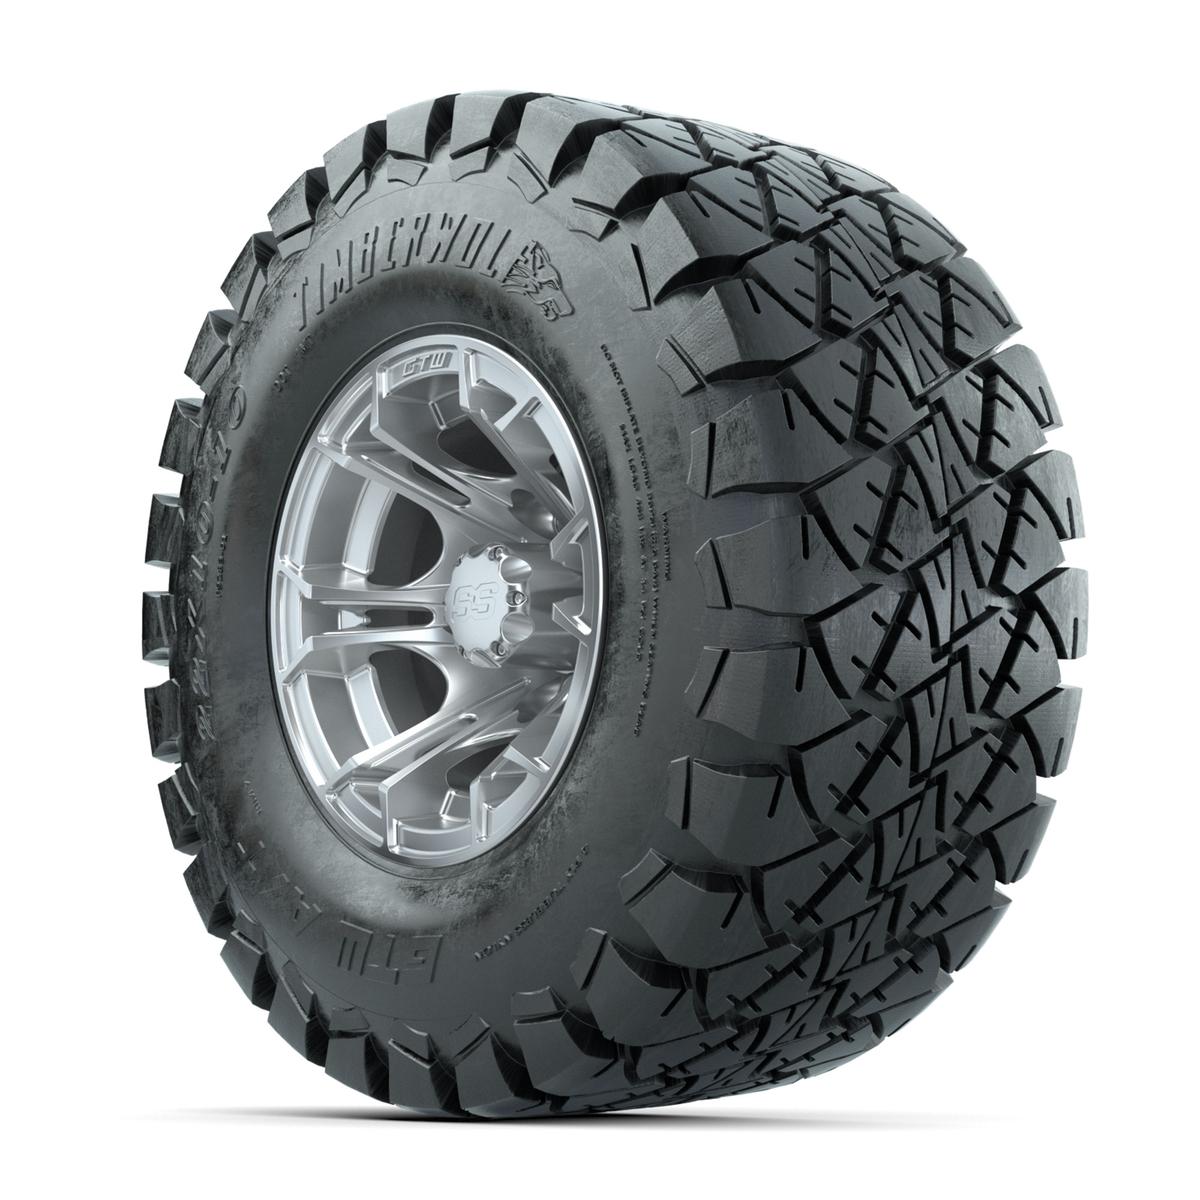 GTW Spyder Silver Brush 10 in Wheels with 22x10-10 Timberwolf All Terrain Tires – Full Set